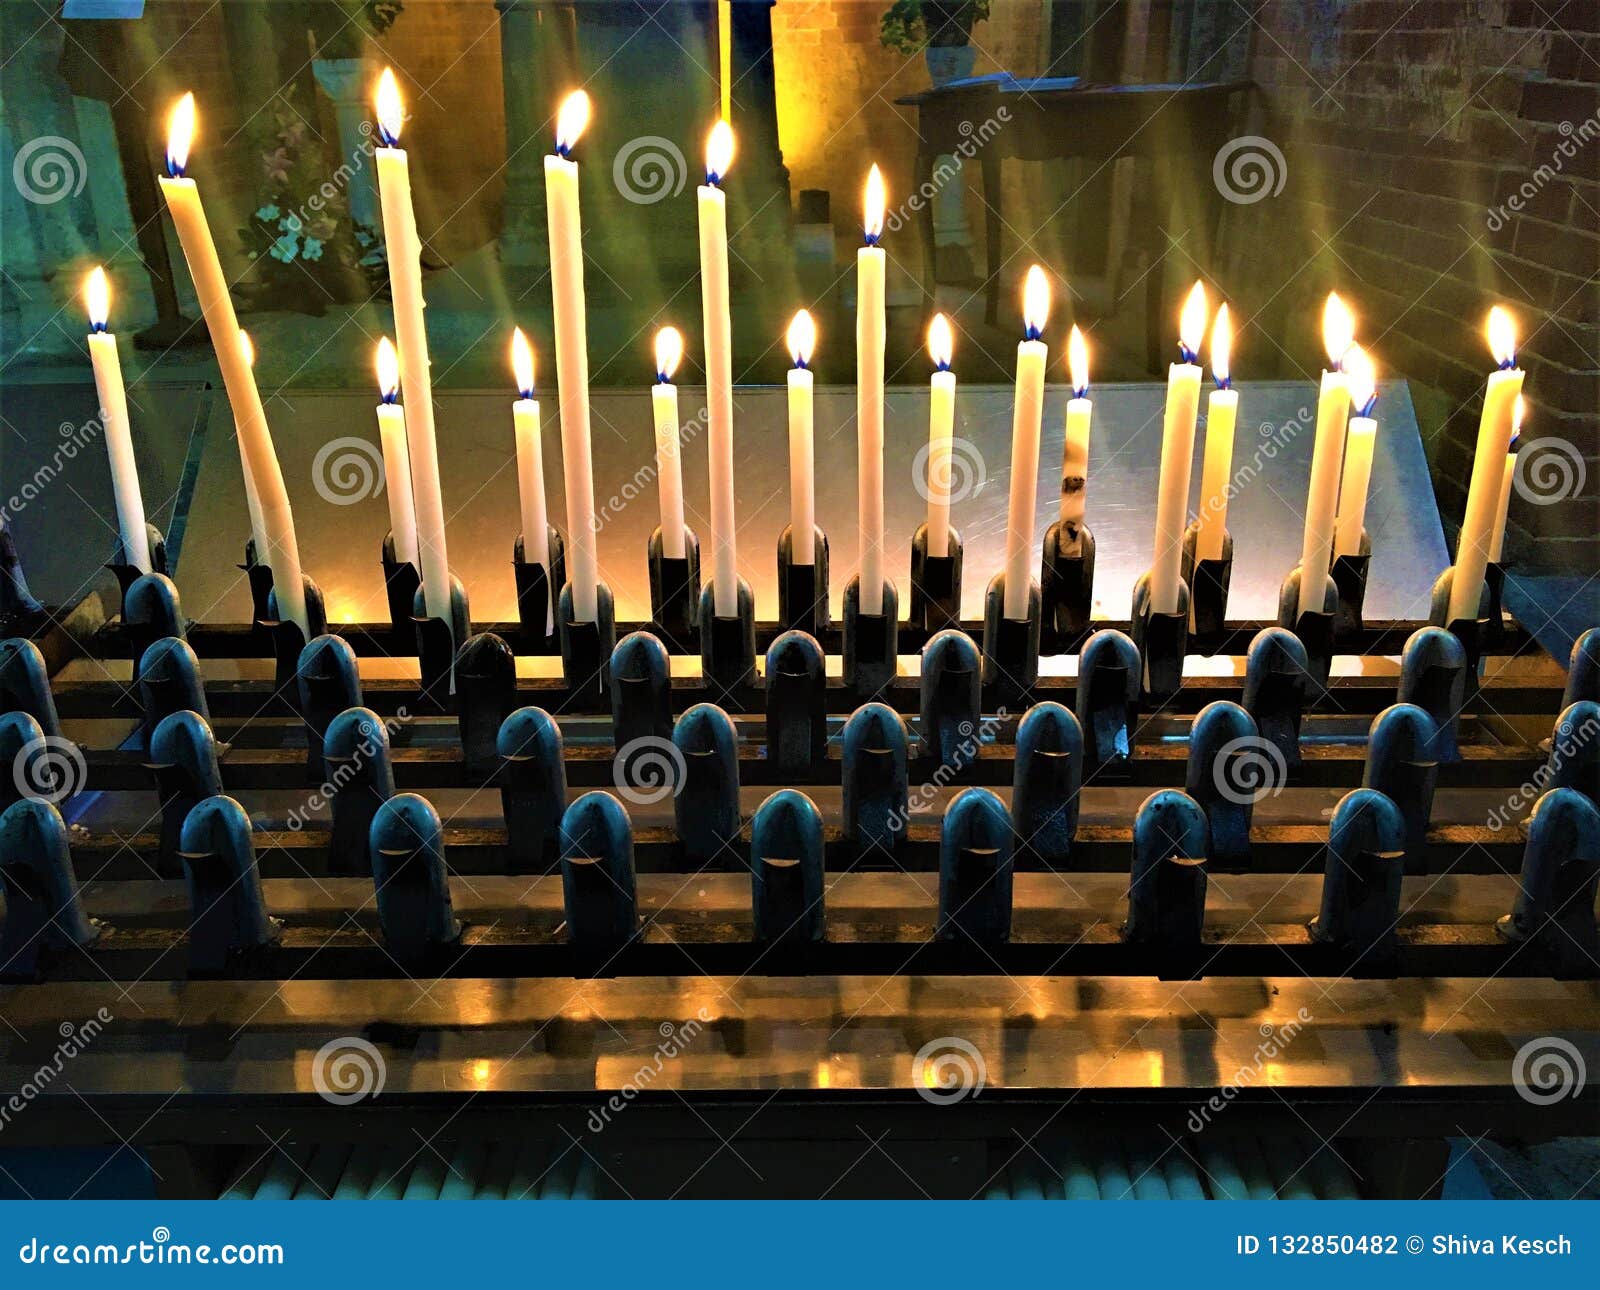 Candles, Light and Mystical Atmosphere Stock Photo - Image of religion